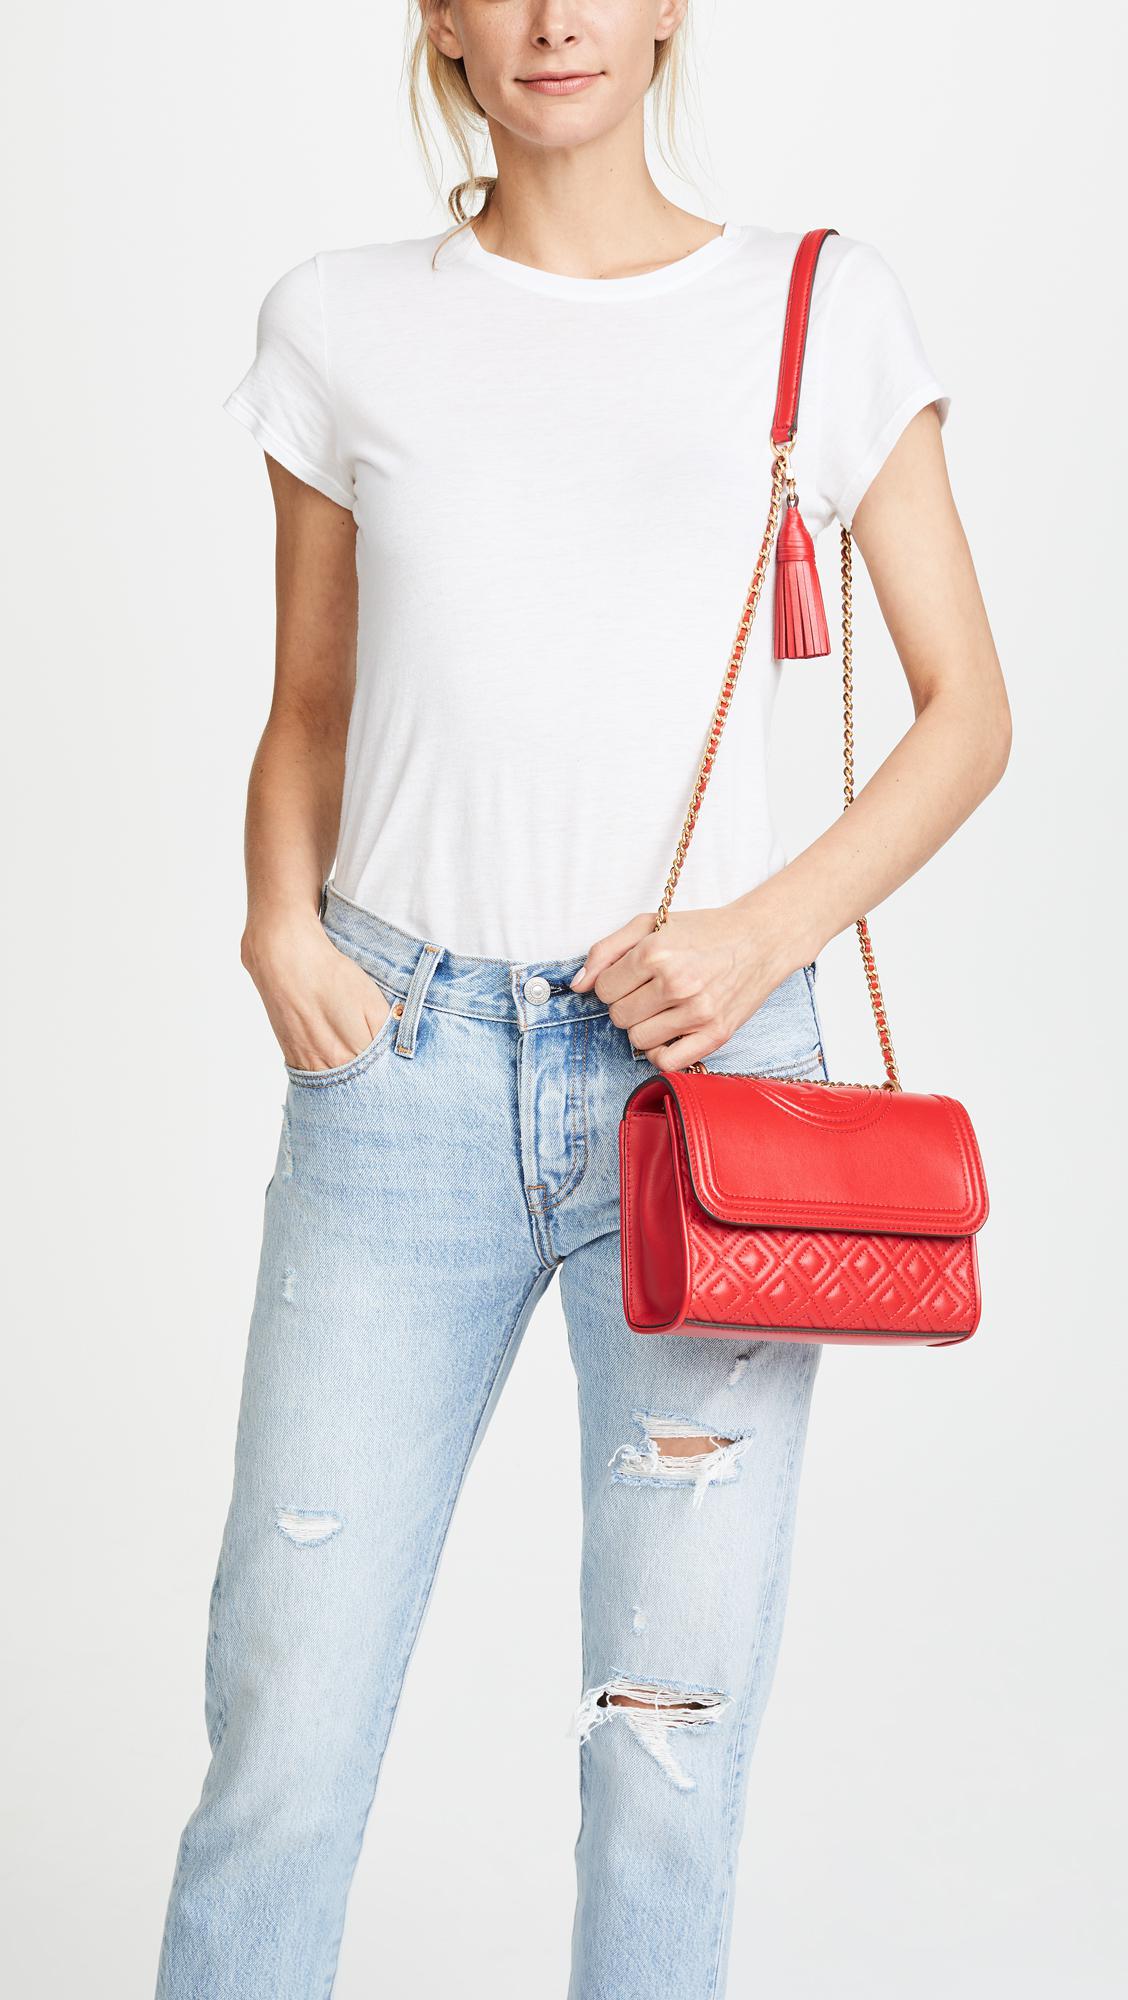 Red TORY BURCH FLEMING SOFT SMALL CONVERTIBLE SHOULDER BAG (152976600)